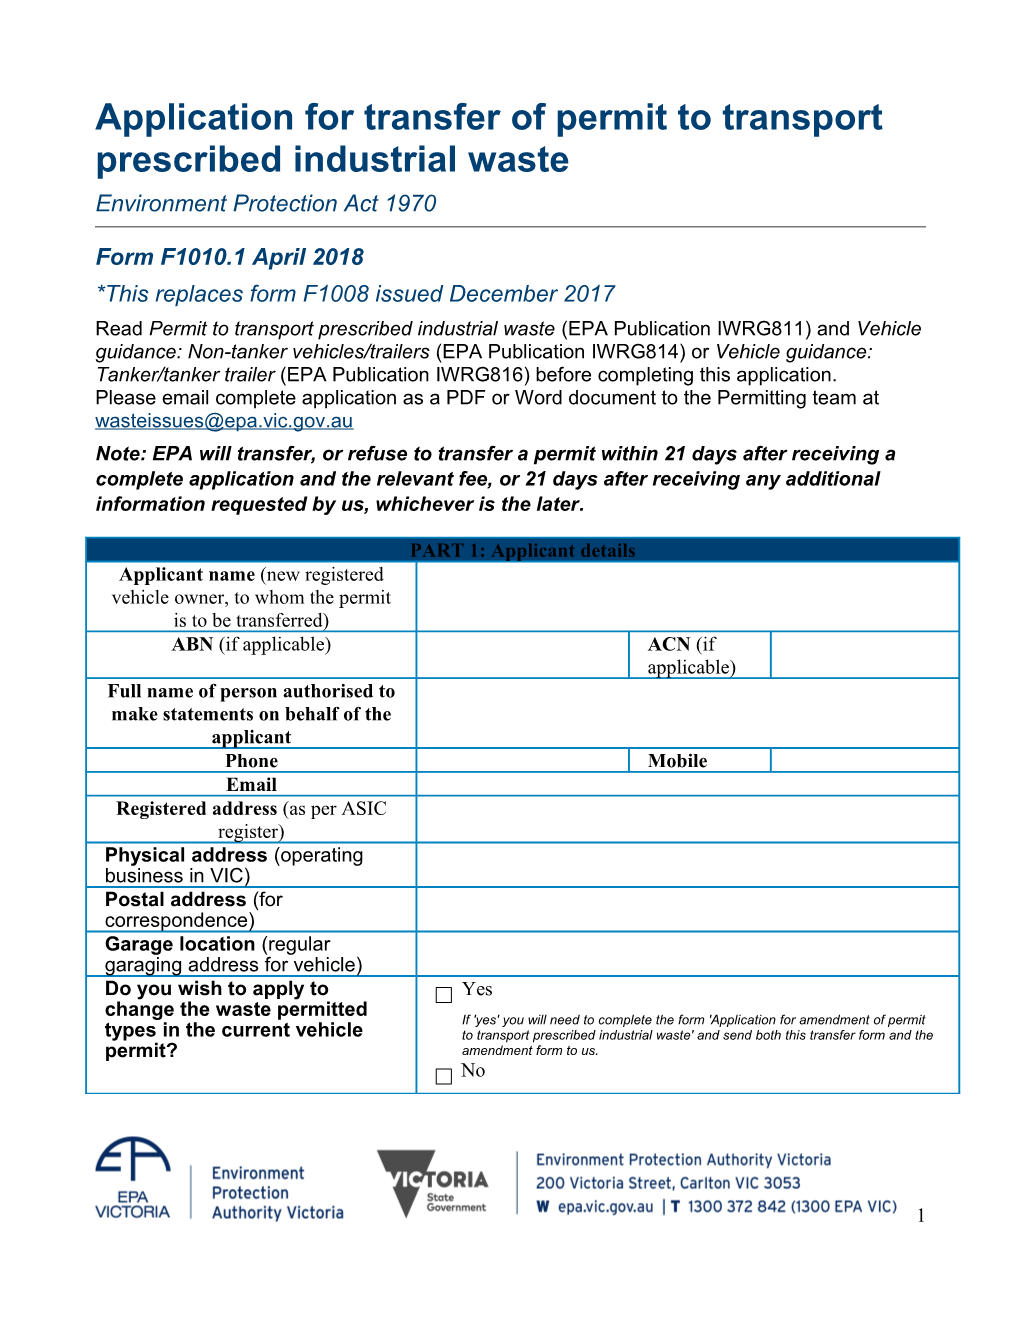 Application for Transfer of Permit to Transport Prescribed Industrial Waste